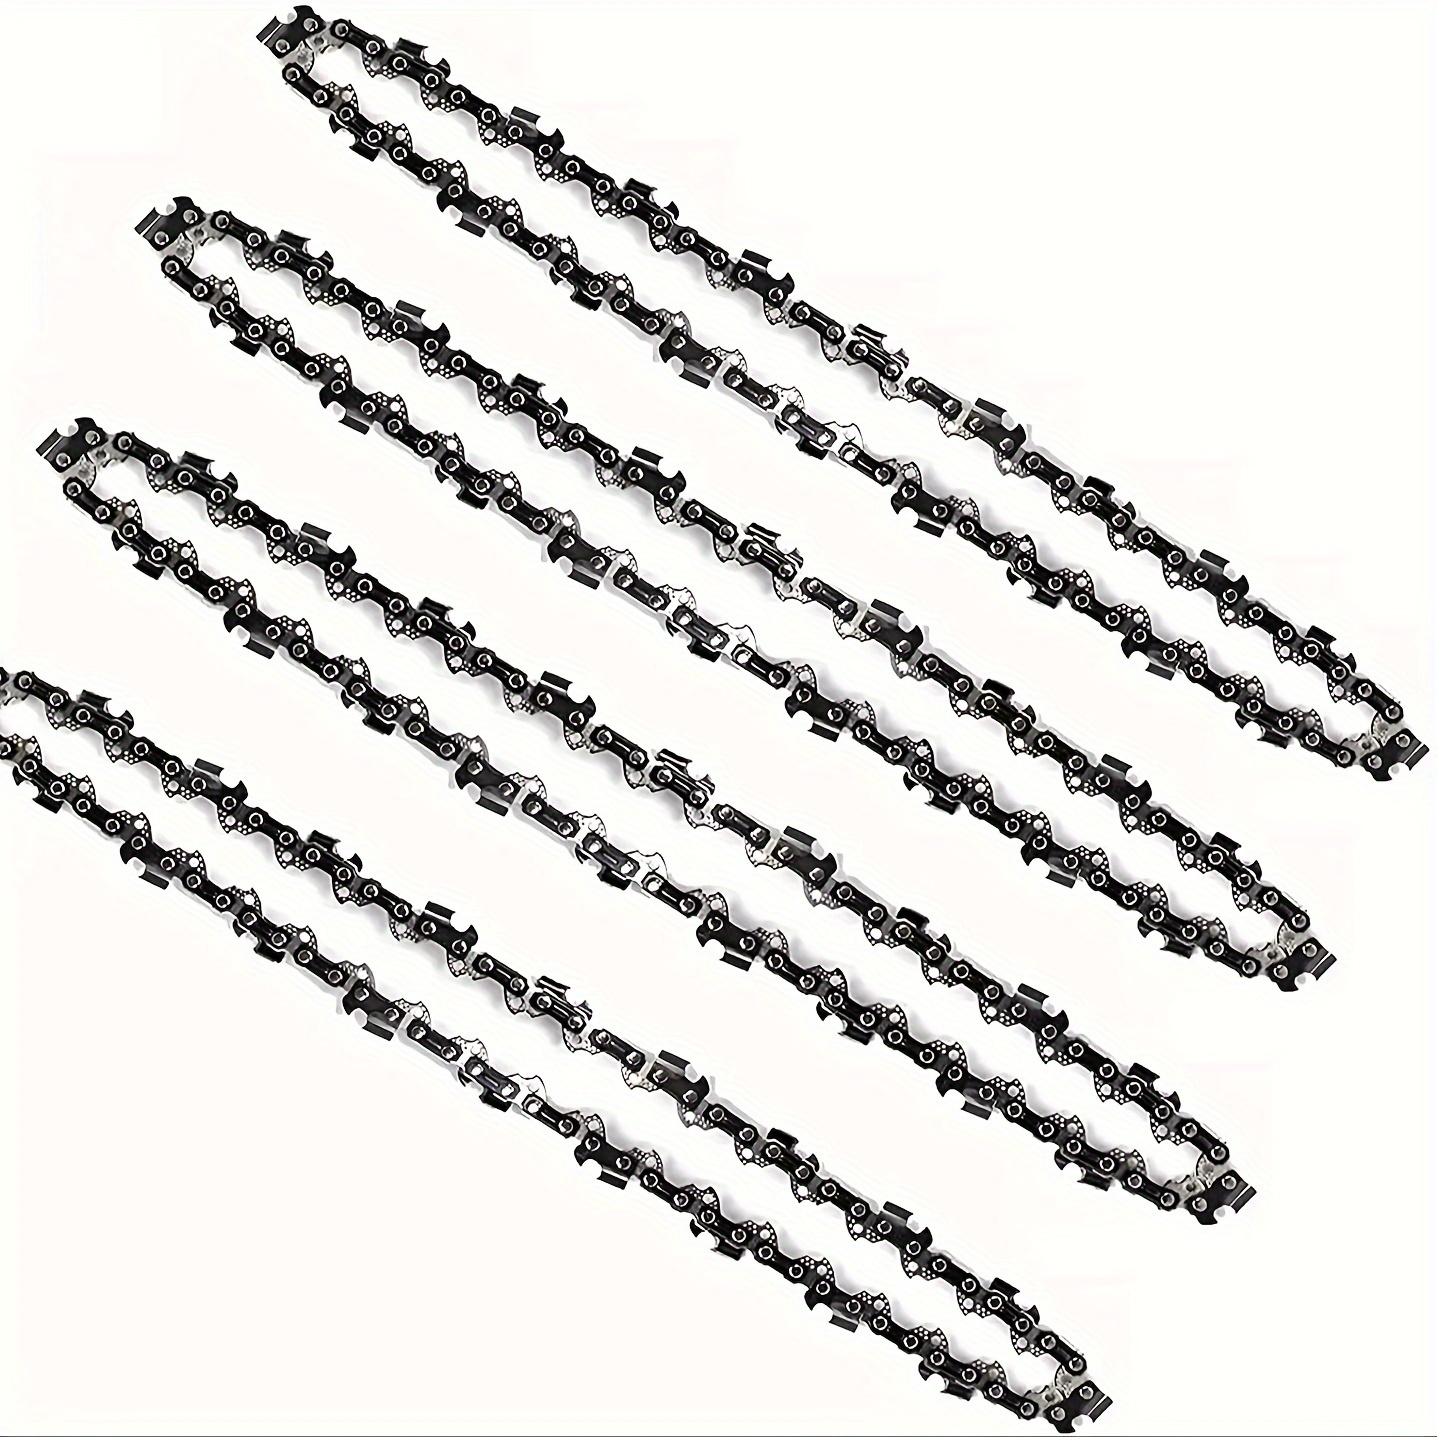 

4pcs 16 Inch Chainsaw Chain 3/8" Lp Pitch, 050" Gauge, 56 Drive Links Fits Craftsman, Poulan, , Echo, Greenworks And More, S56